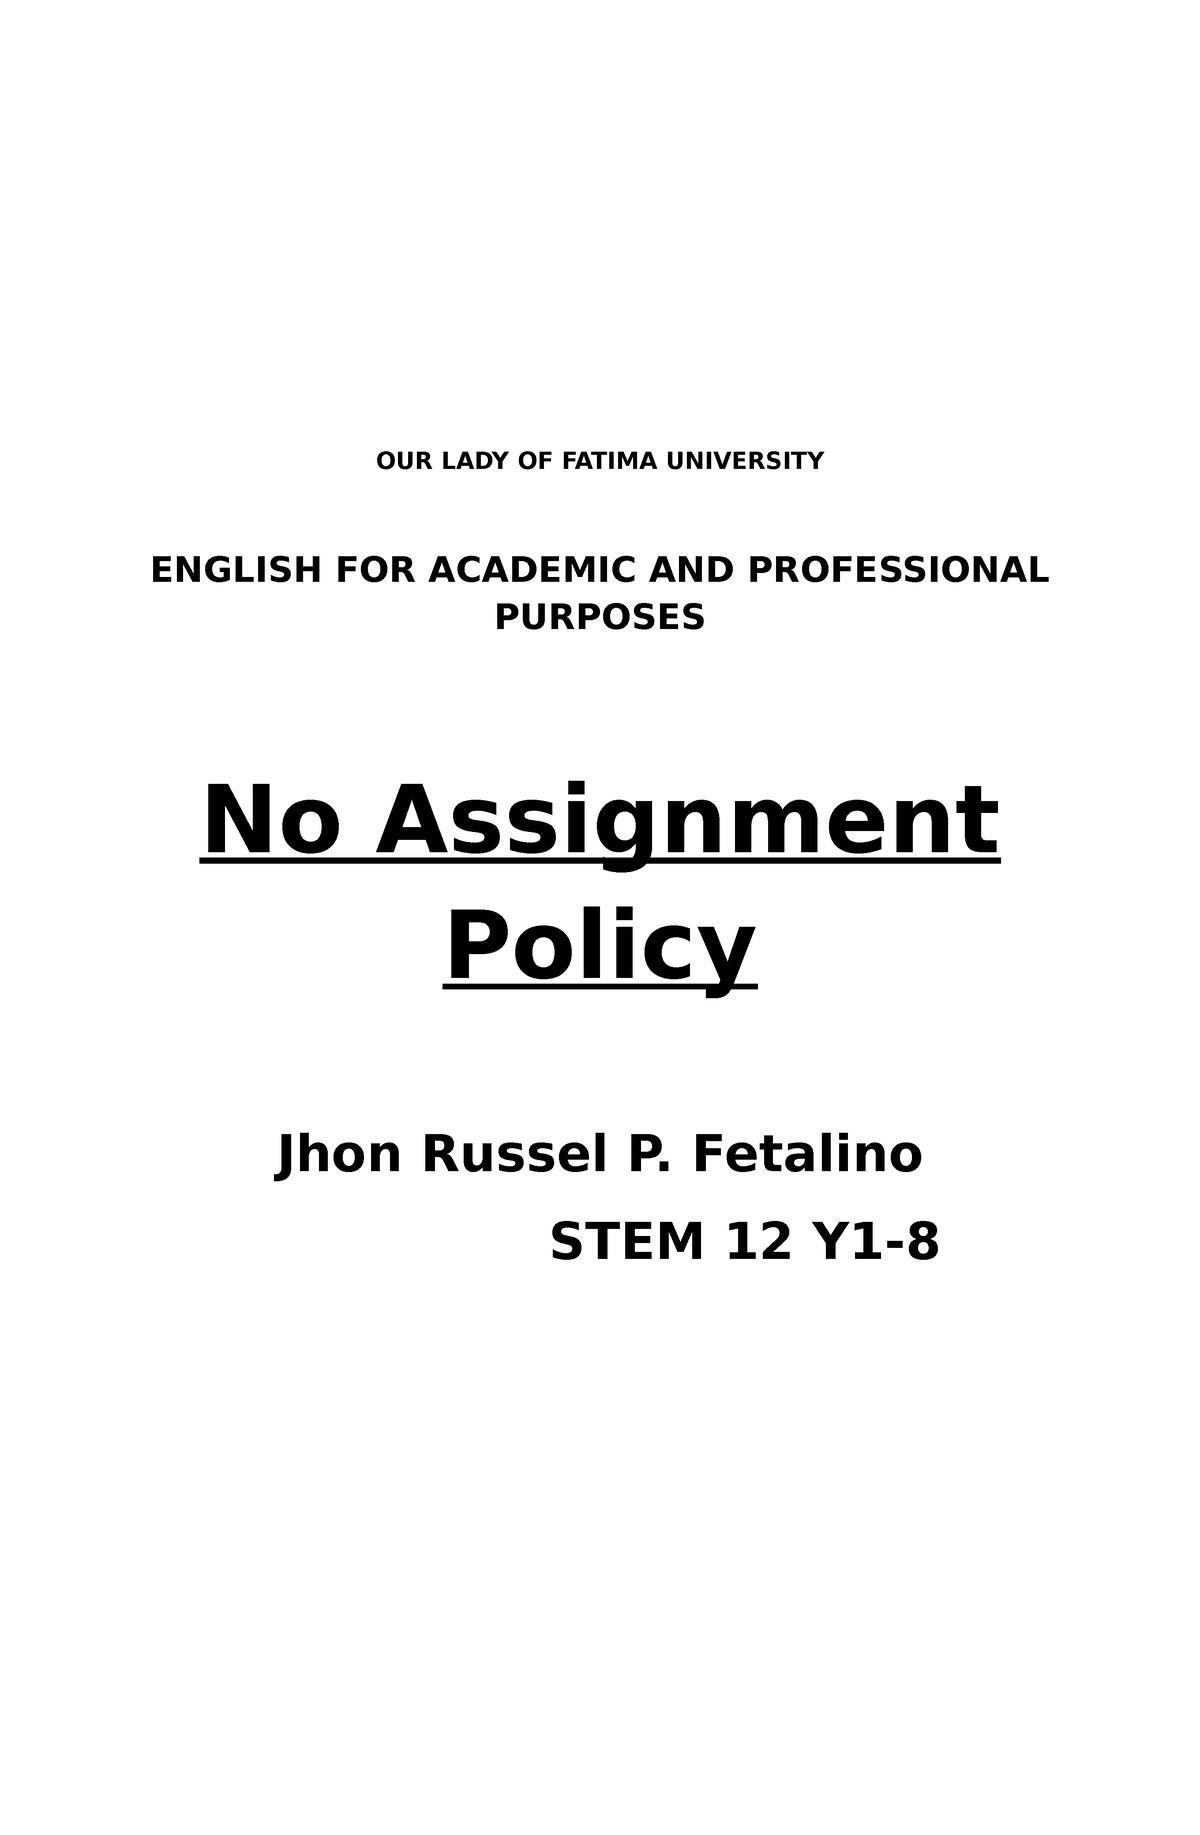 opinion about no assignment policy